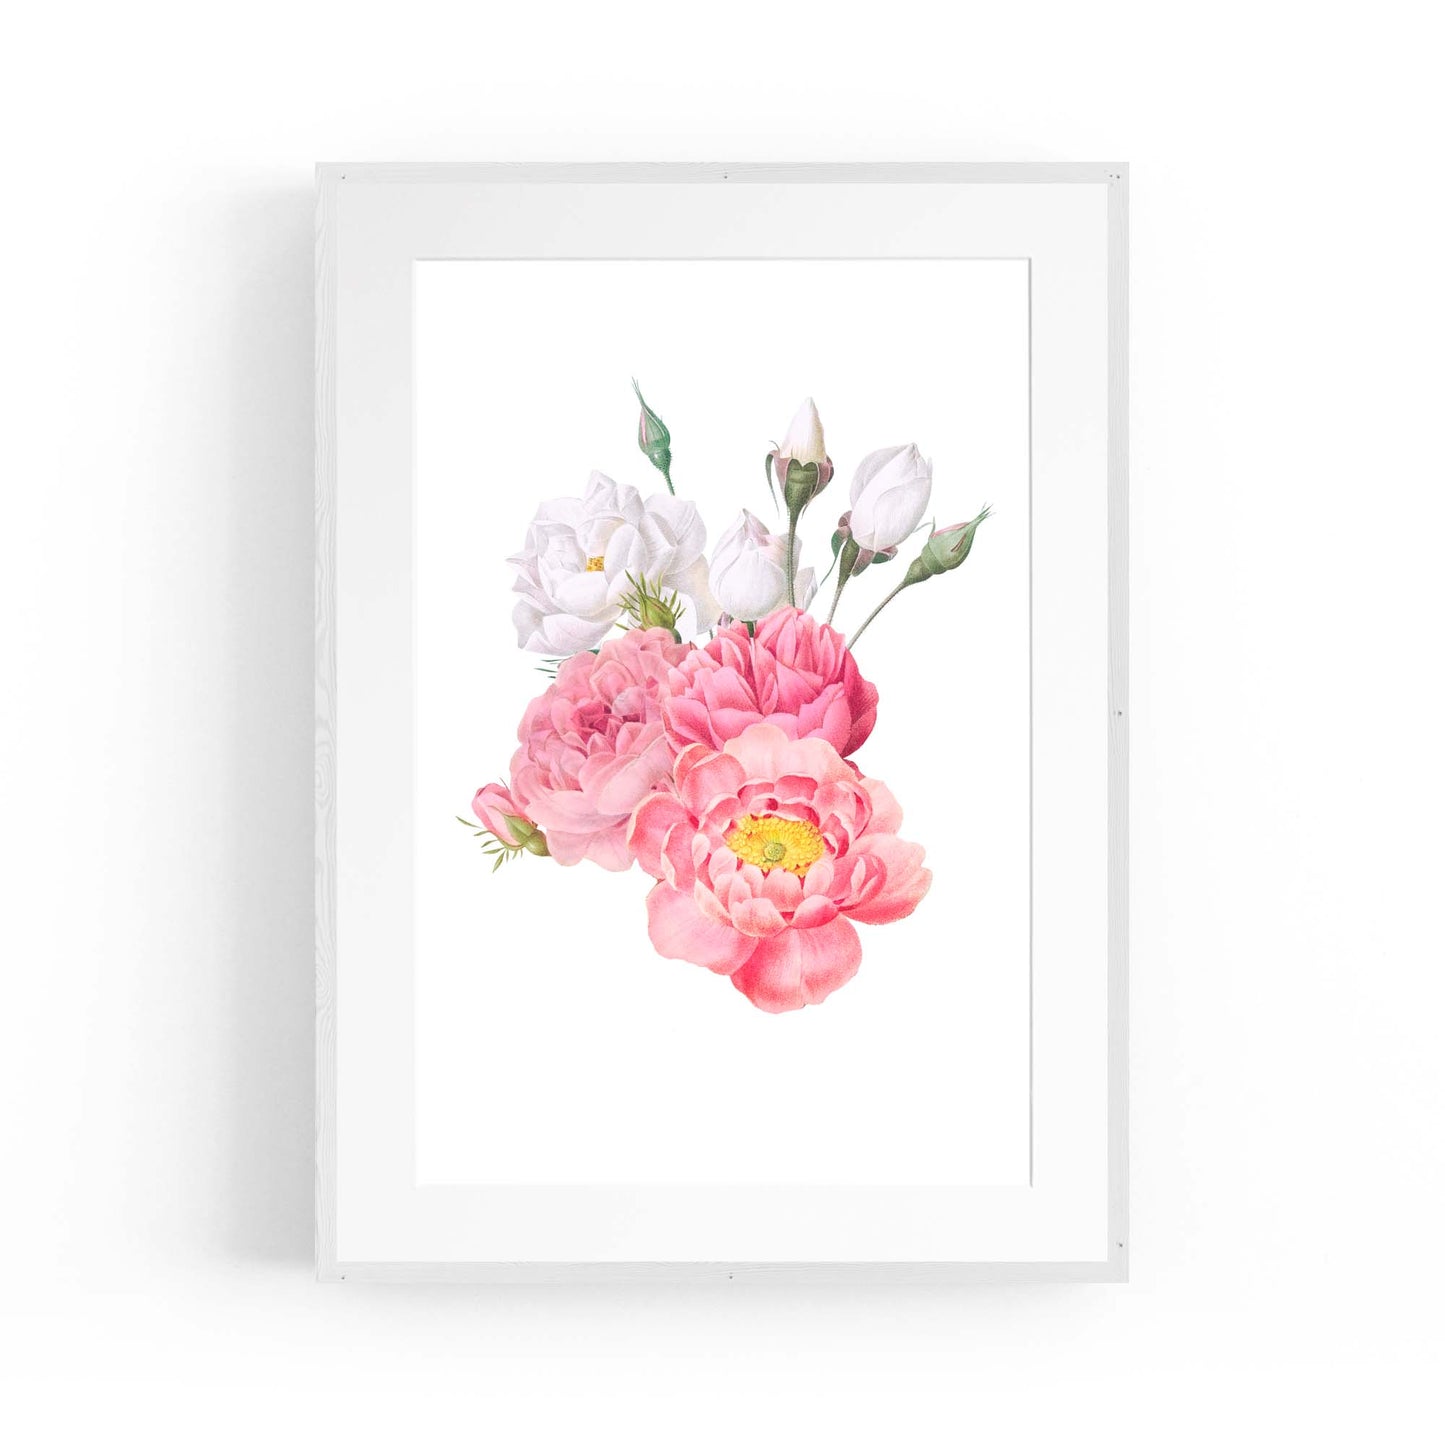 Botanical Flower Painting Floral Kitchen Wall Art #6 - The Affordable Art Company